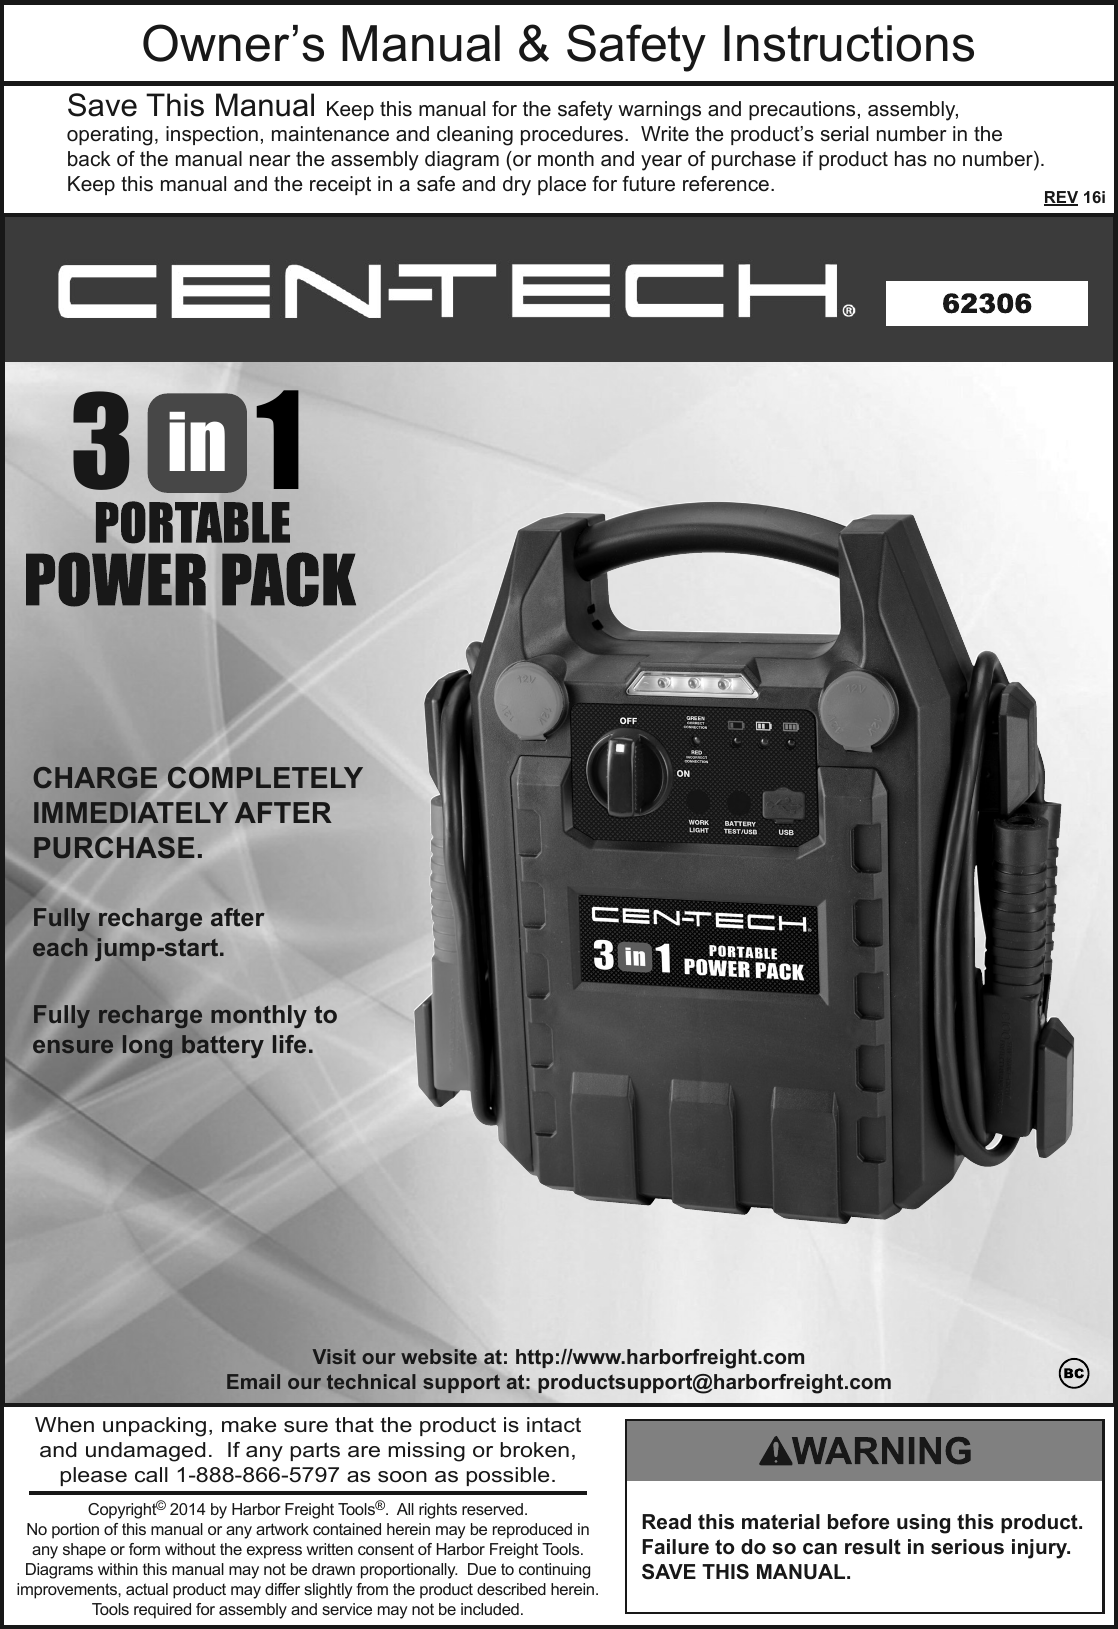 Page 1 of 12 - Manual For The 62306 3-in-1 Portable Power Pack With Jump Starter